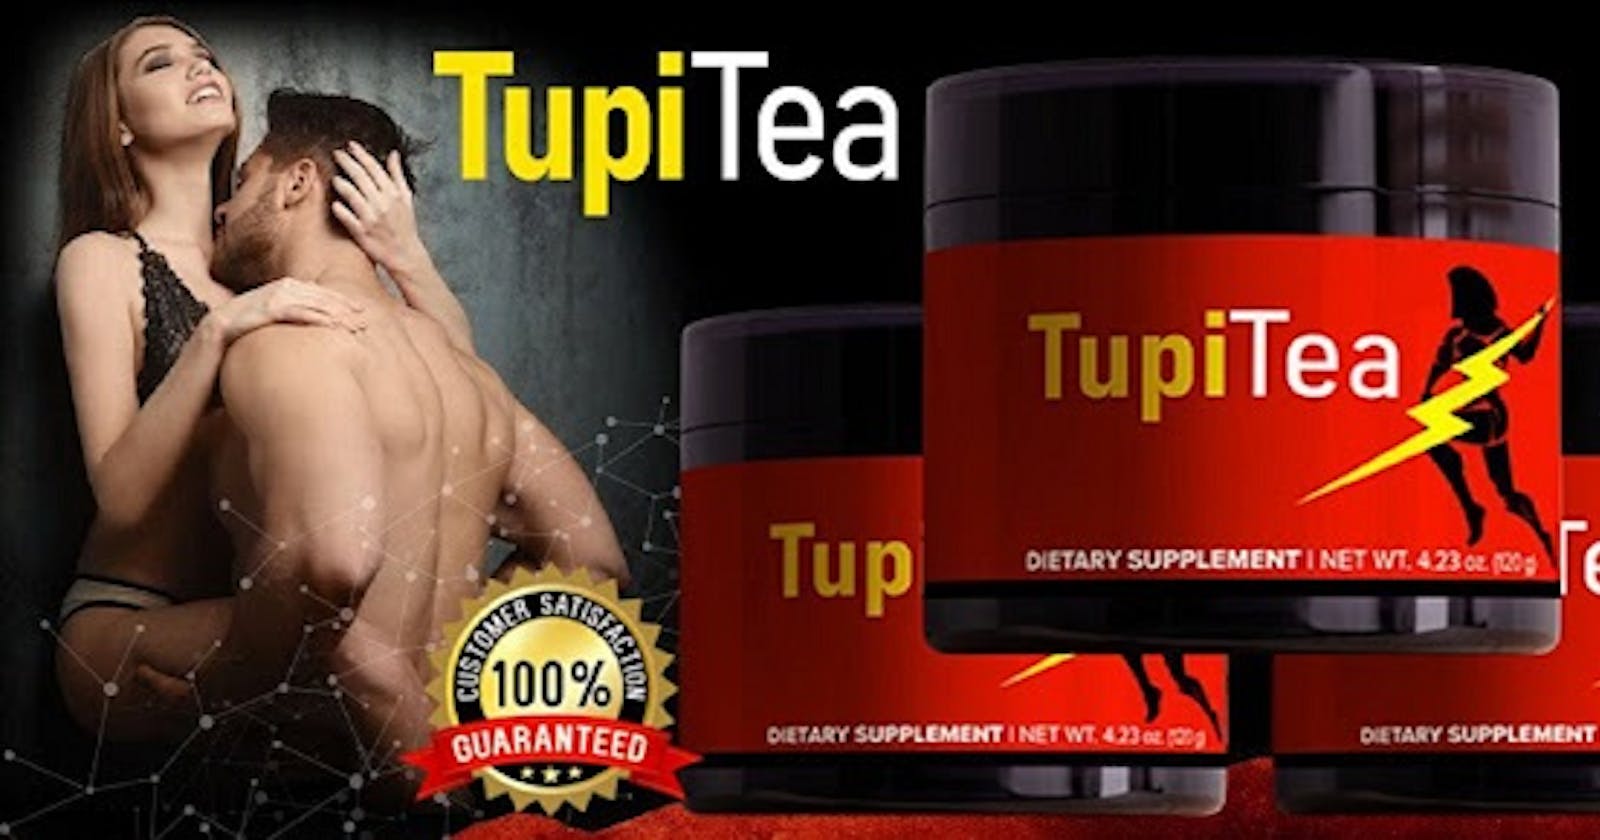 TupiTea Male Enhancement - Boost Sex Power, Read Full Review! Ingredients, Benefits & Buy!